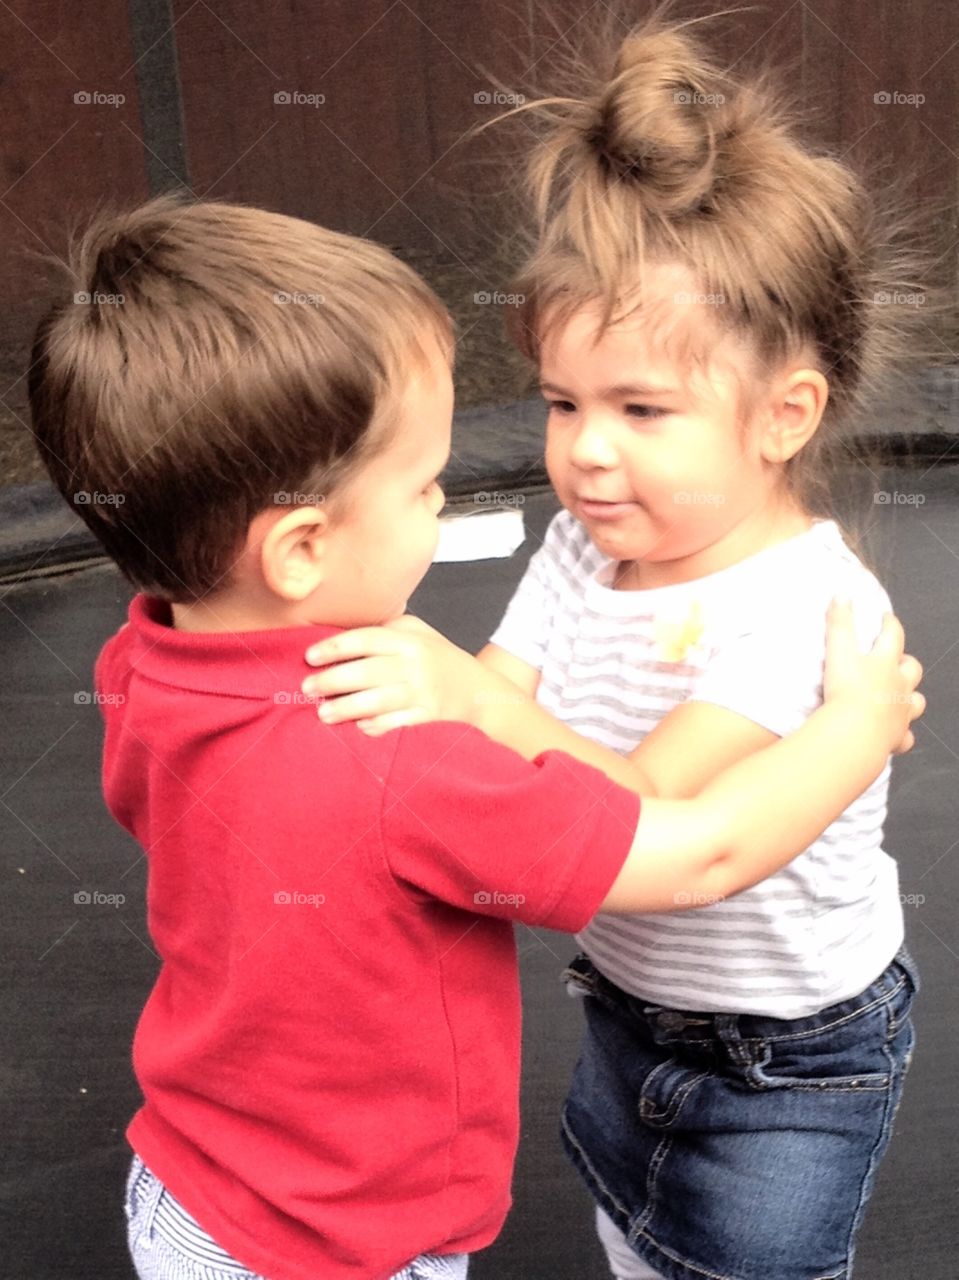 BEST friends share a hug during play time girl & boy age 2